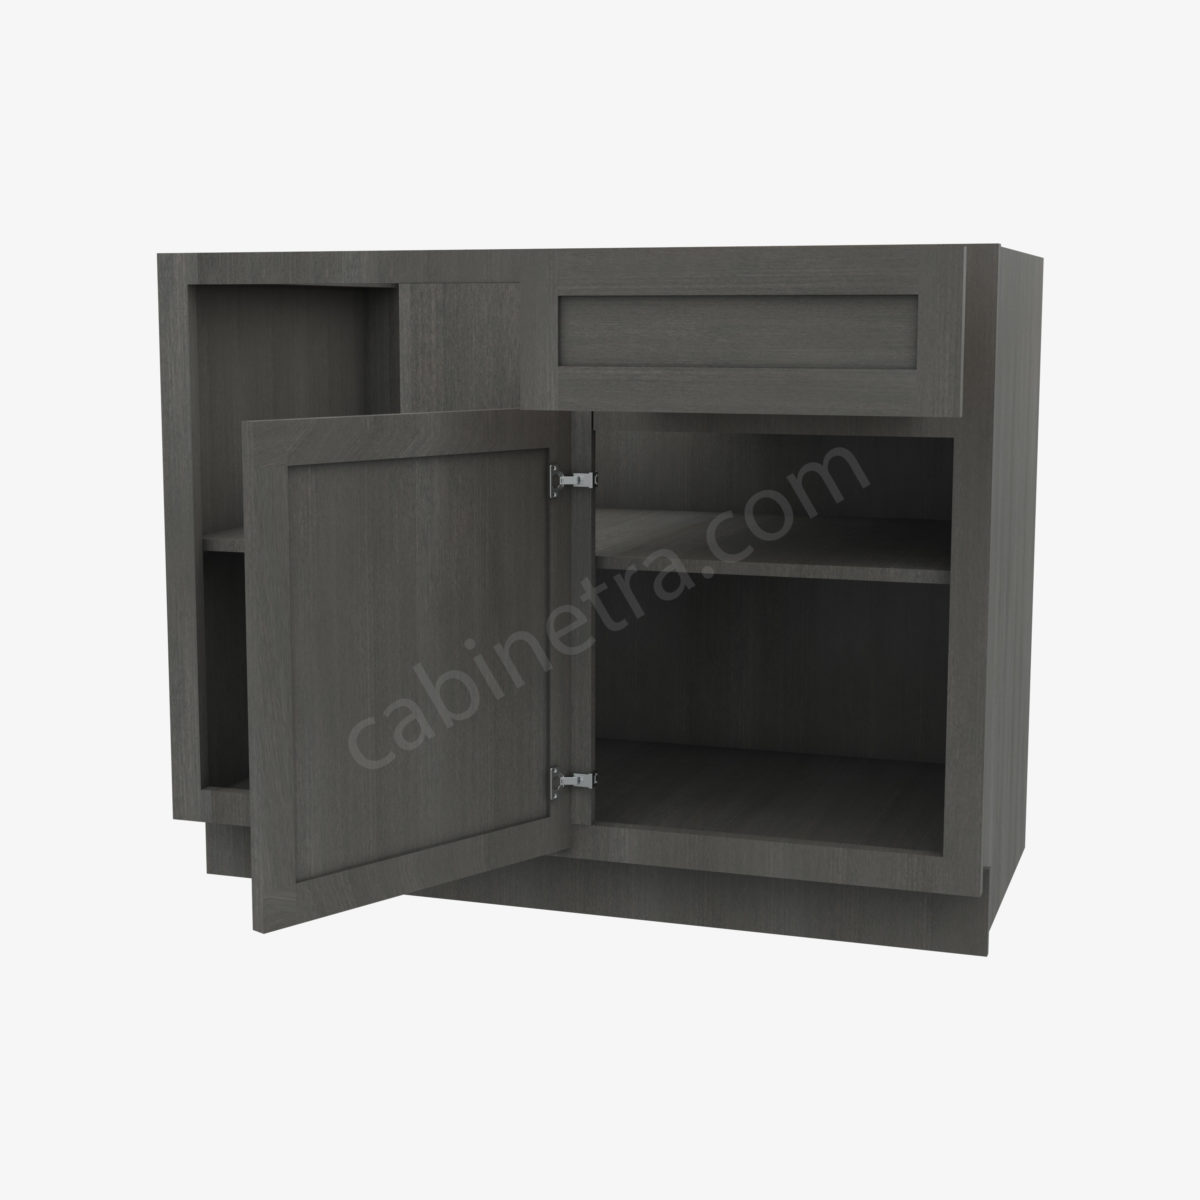 AG BBLC45 48 42W 5 Forevermark Greystone Shaker Cabinetra scaled